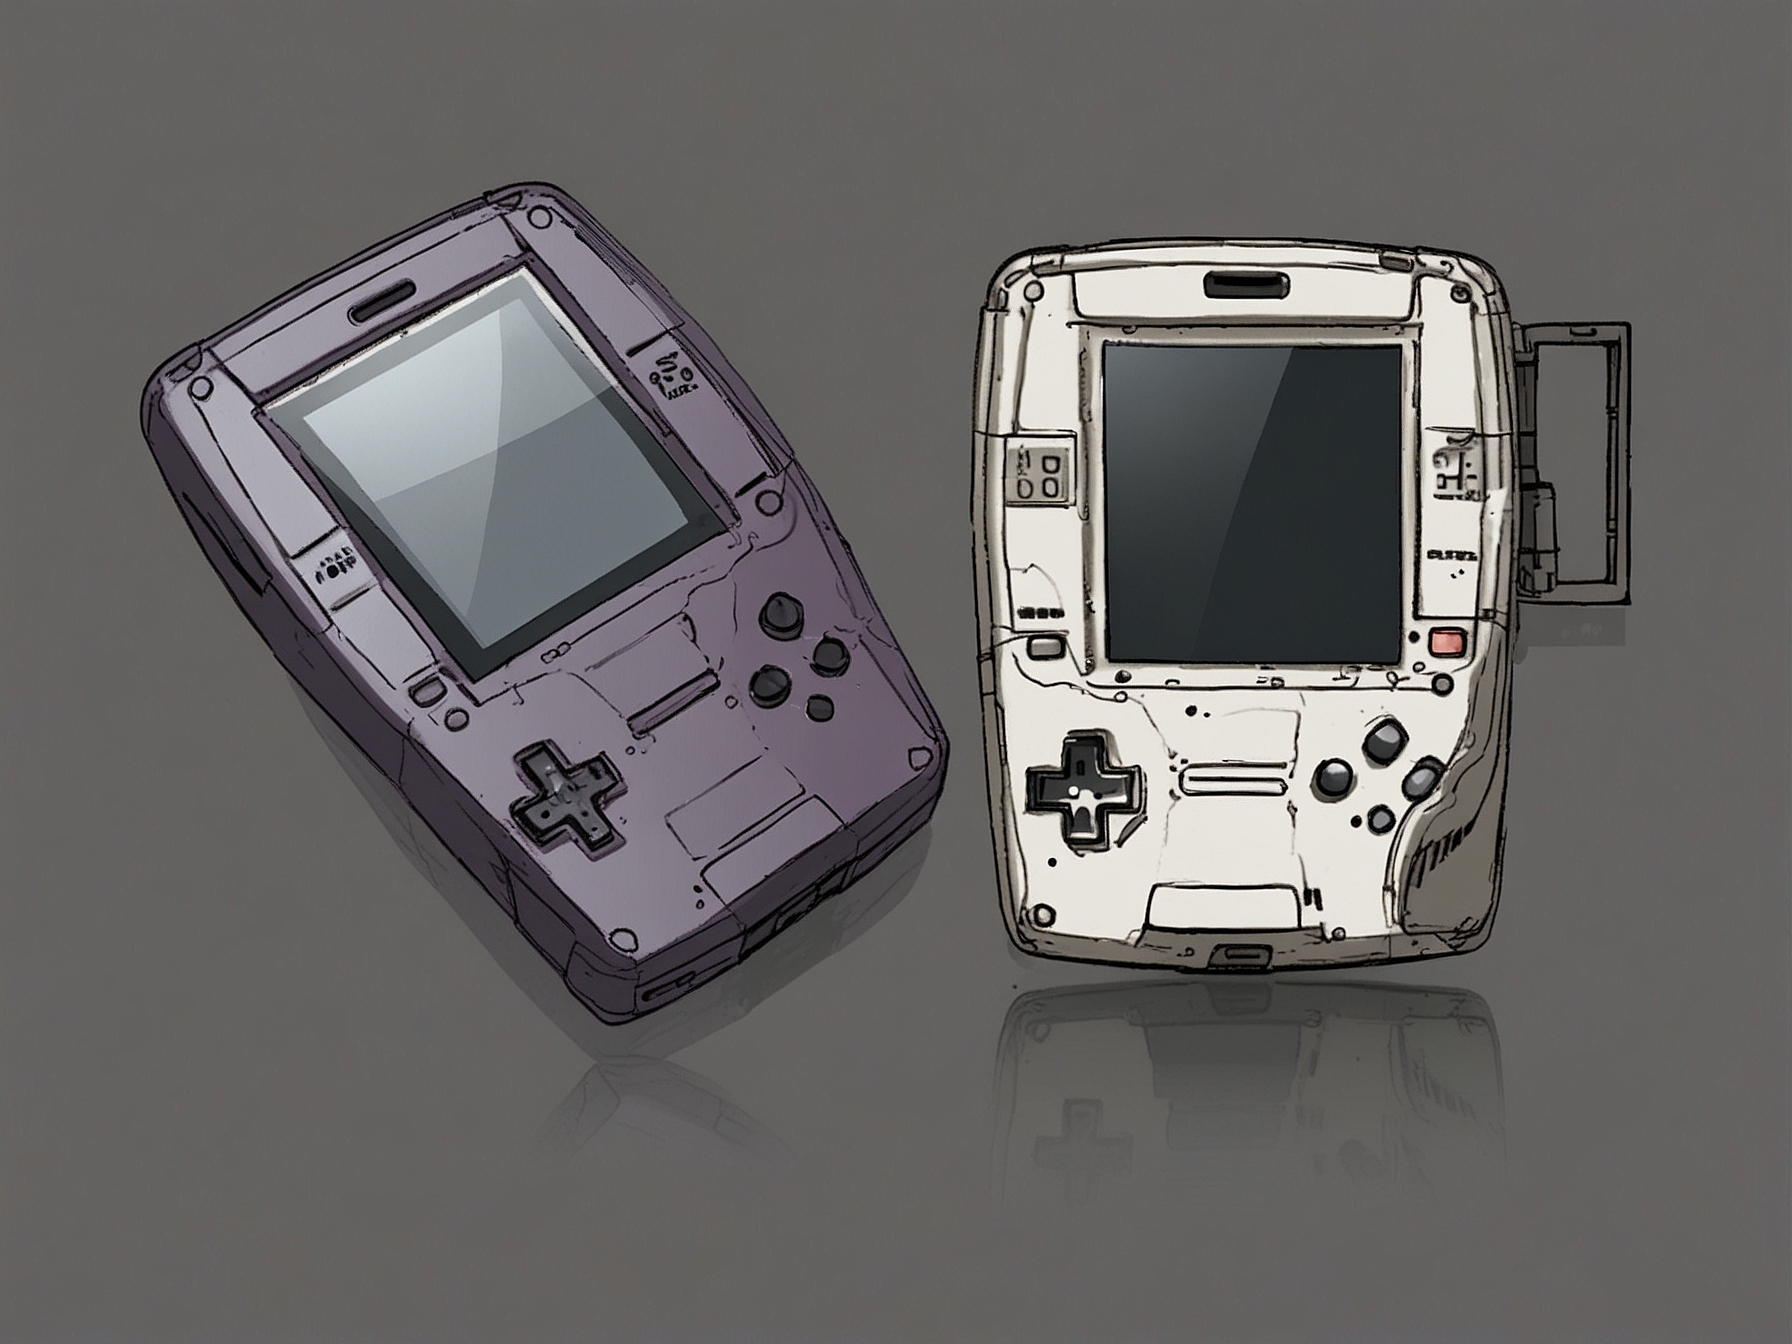 A comparison image showing the Nintendo DS Lite beside the PlayStation Portable, highlighting their design and size differences.